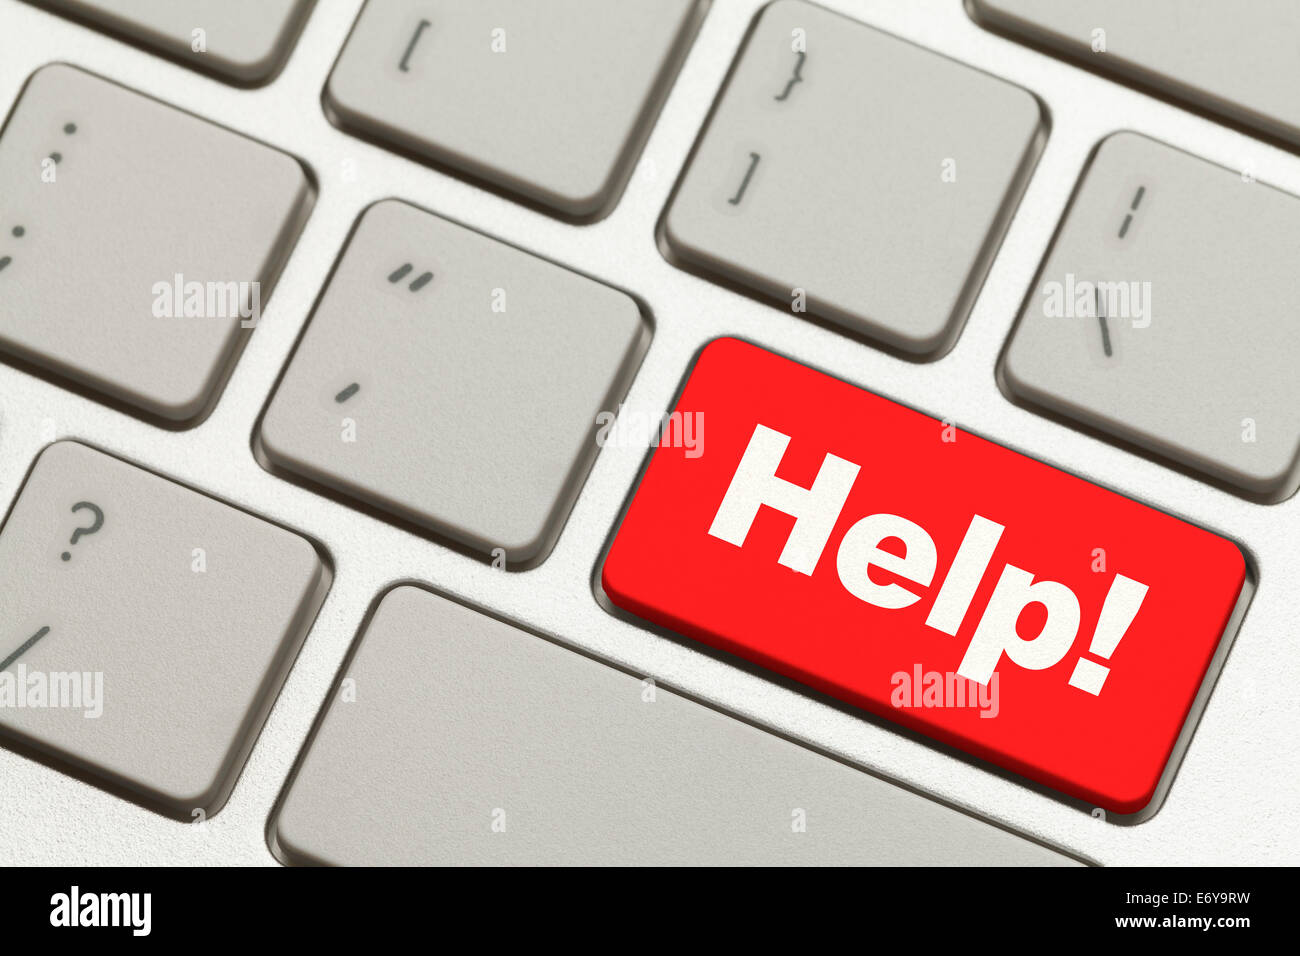 Close Up of Red Help Key Button on Keyboard. Stock Photo